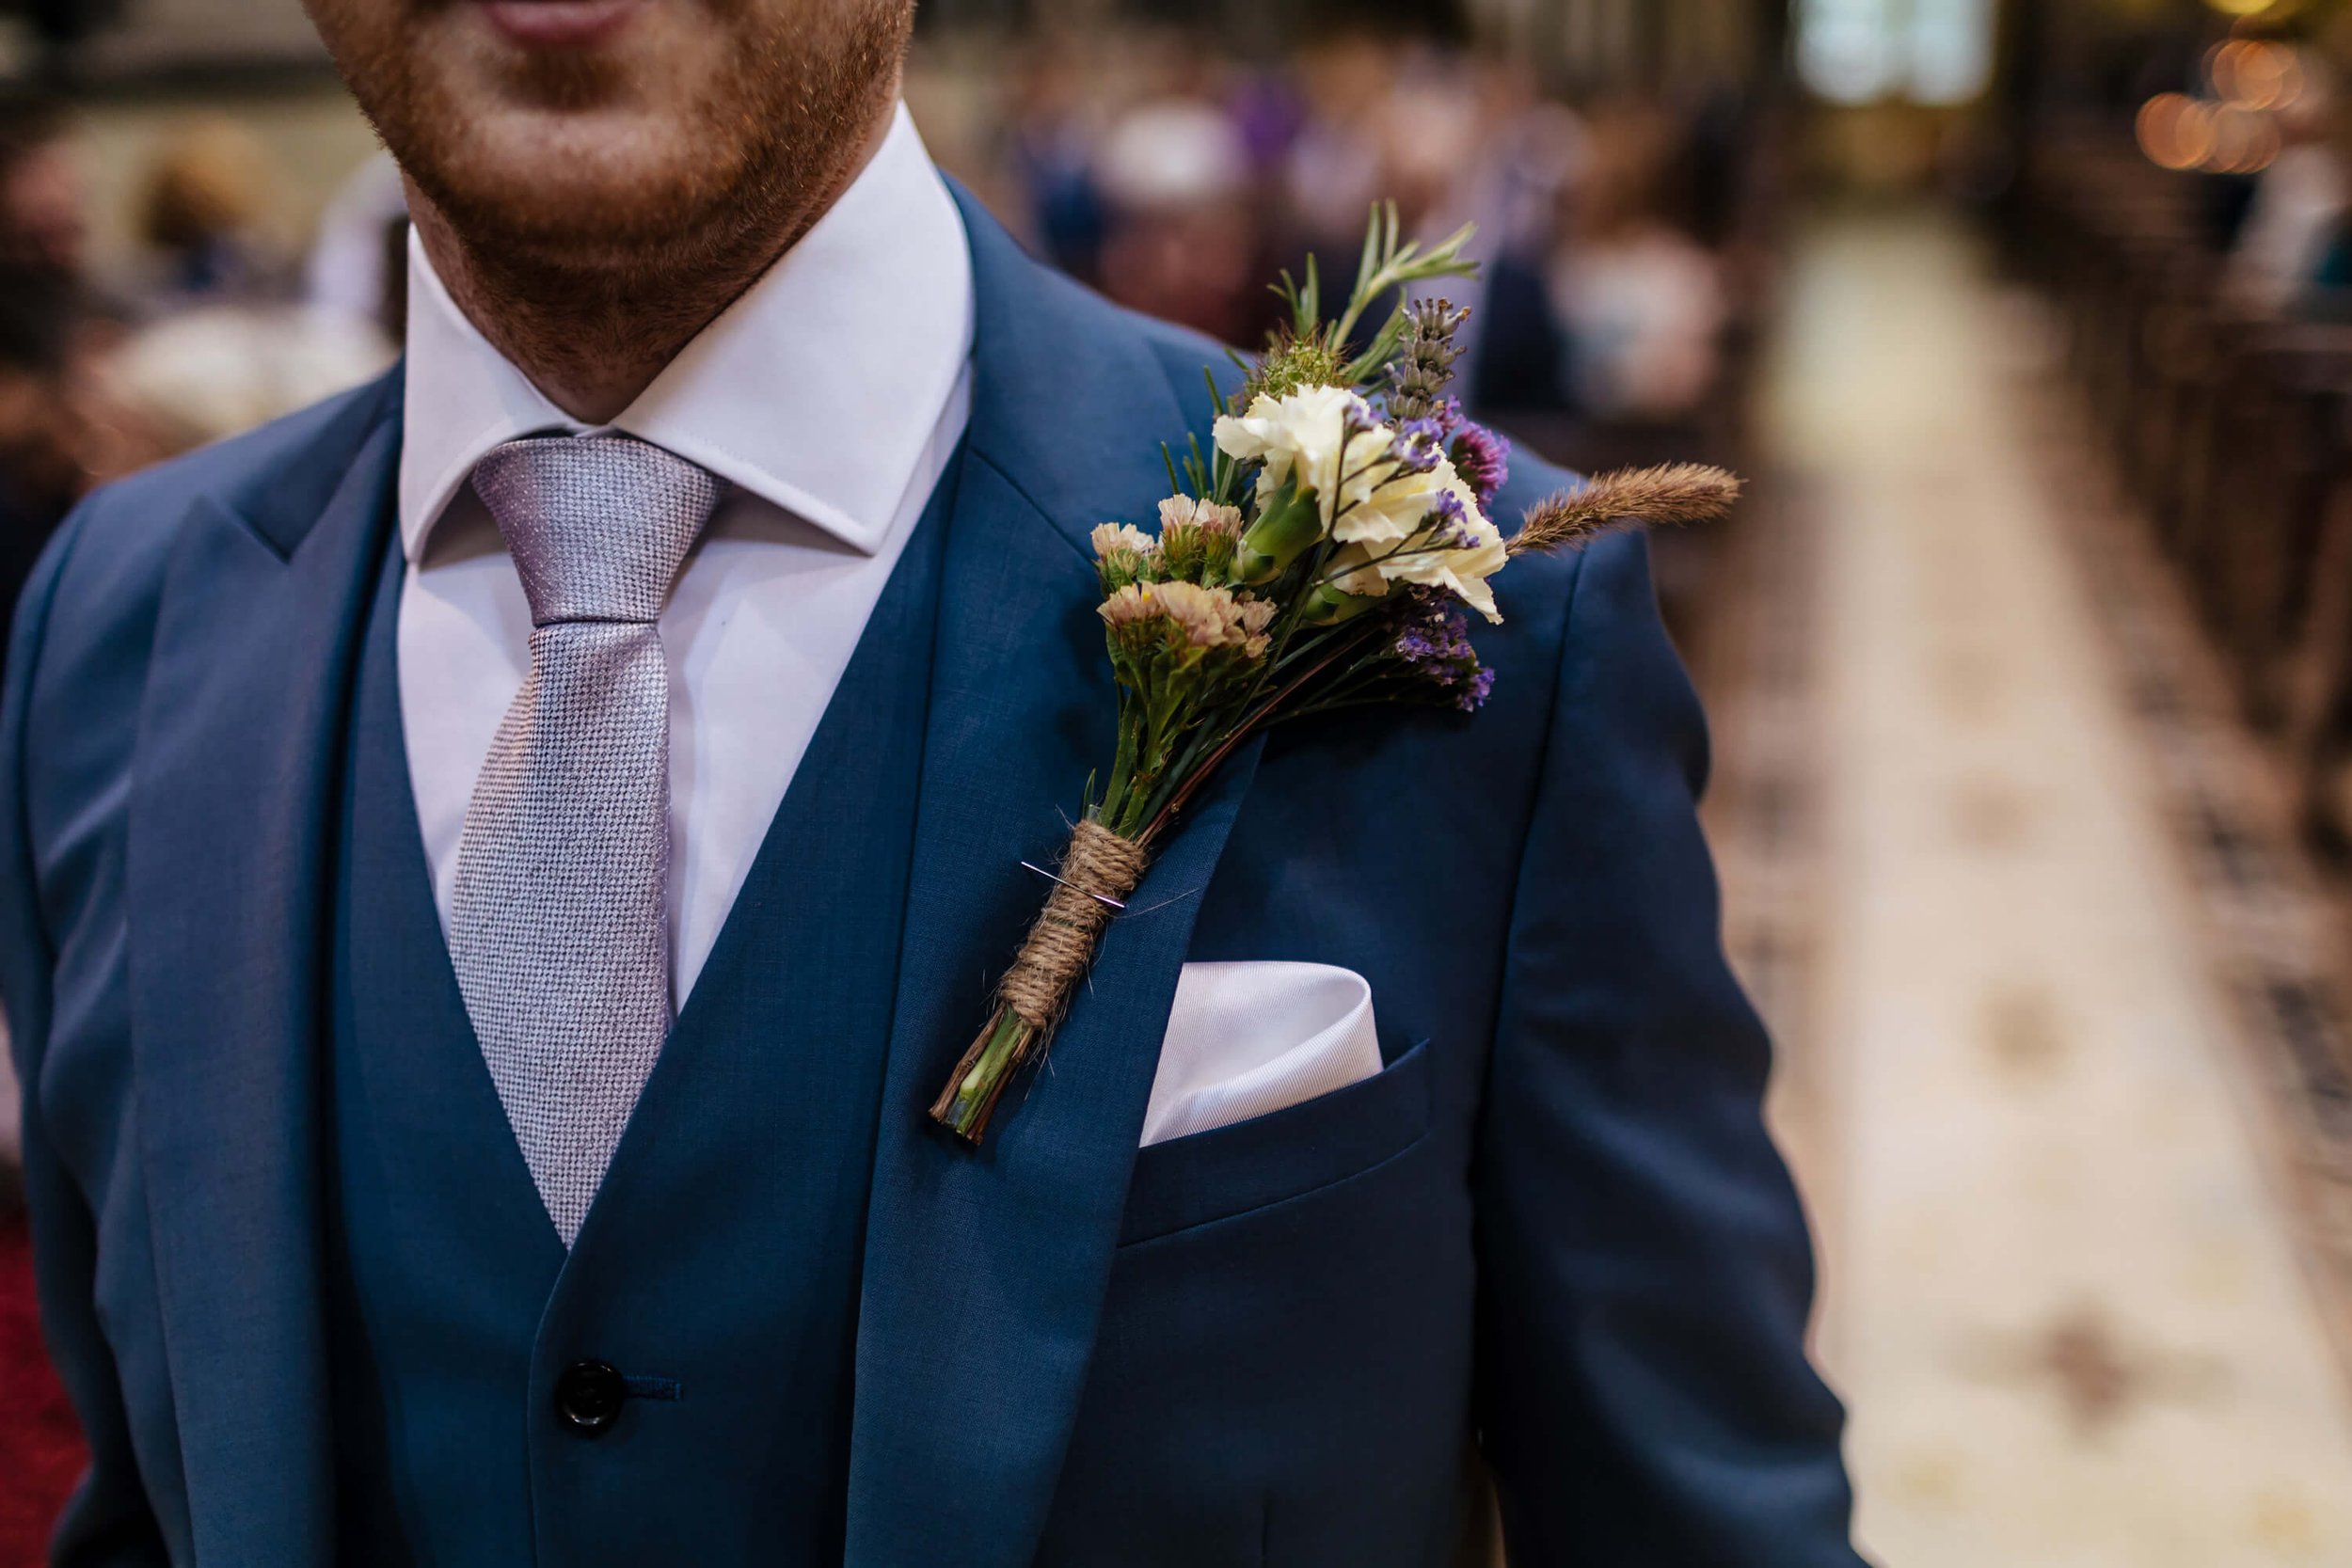 A close up of the groom's buttonhole in his suit